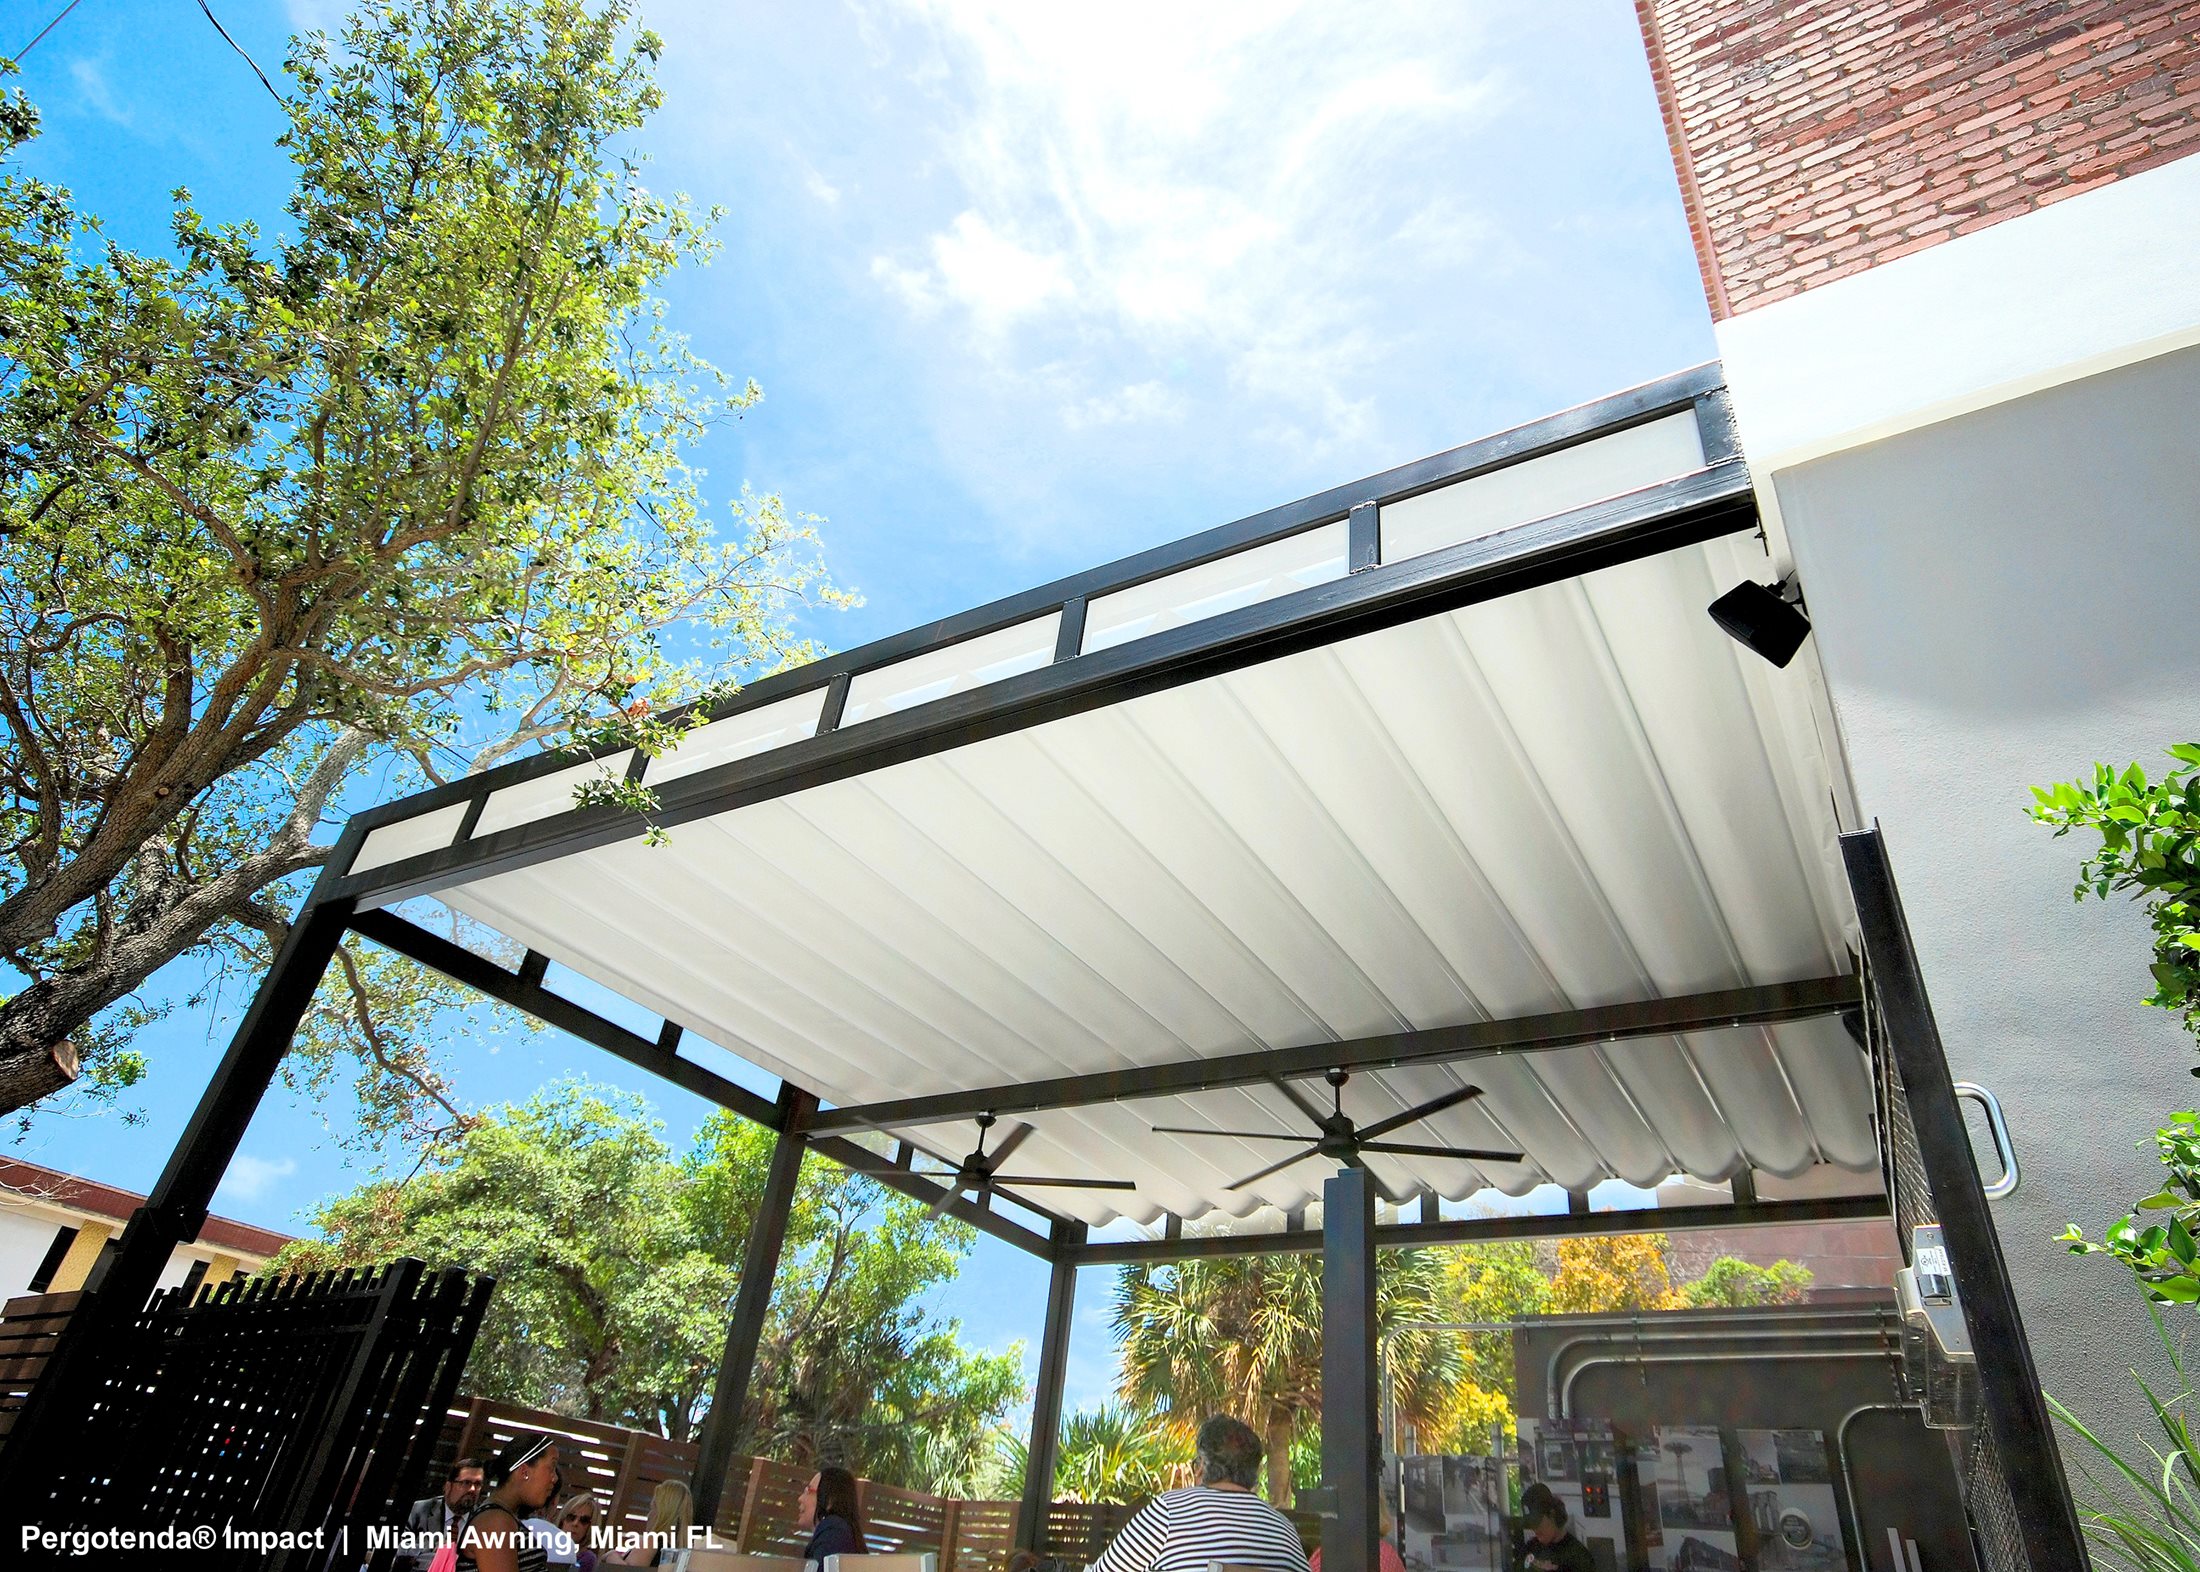 Retractable-fabric-roof-canopy-by-Miami-Awning-Co-3-ADJ.jpg